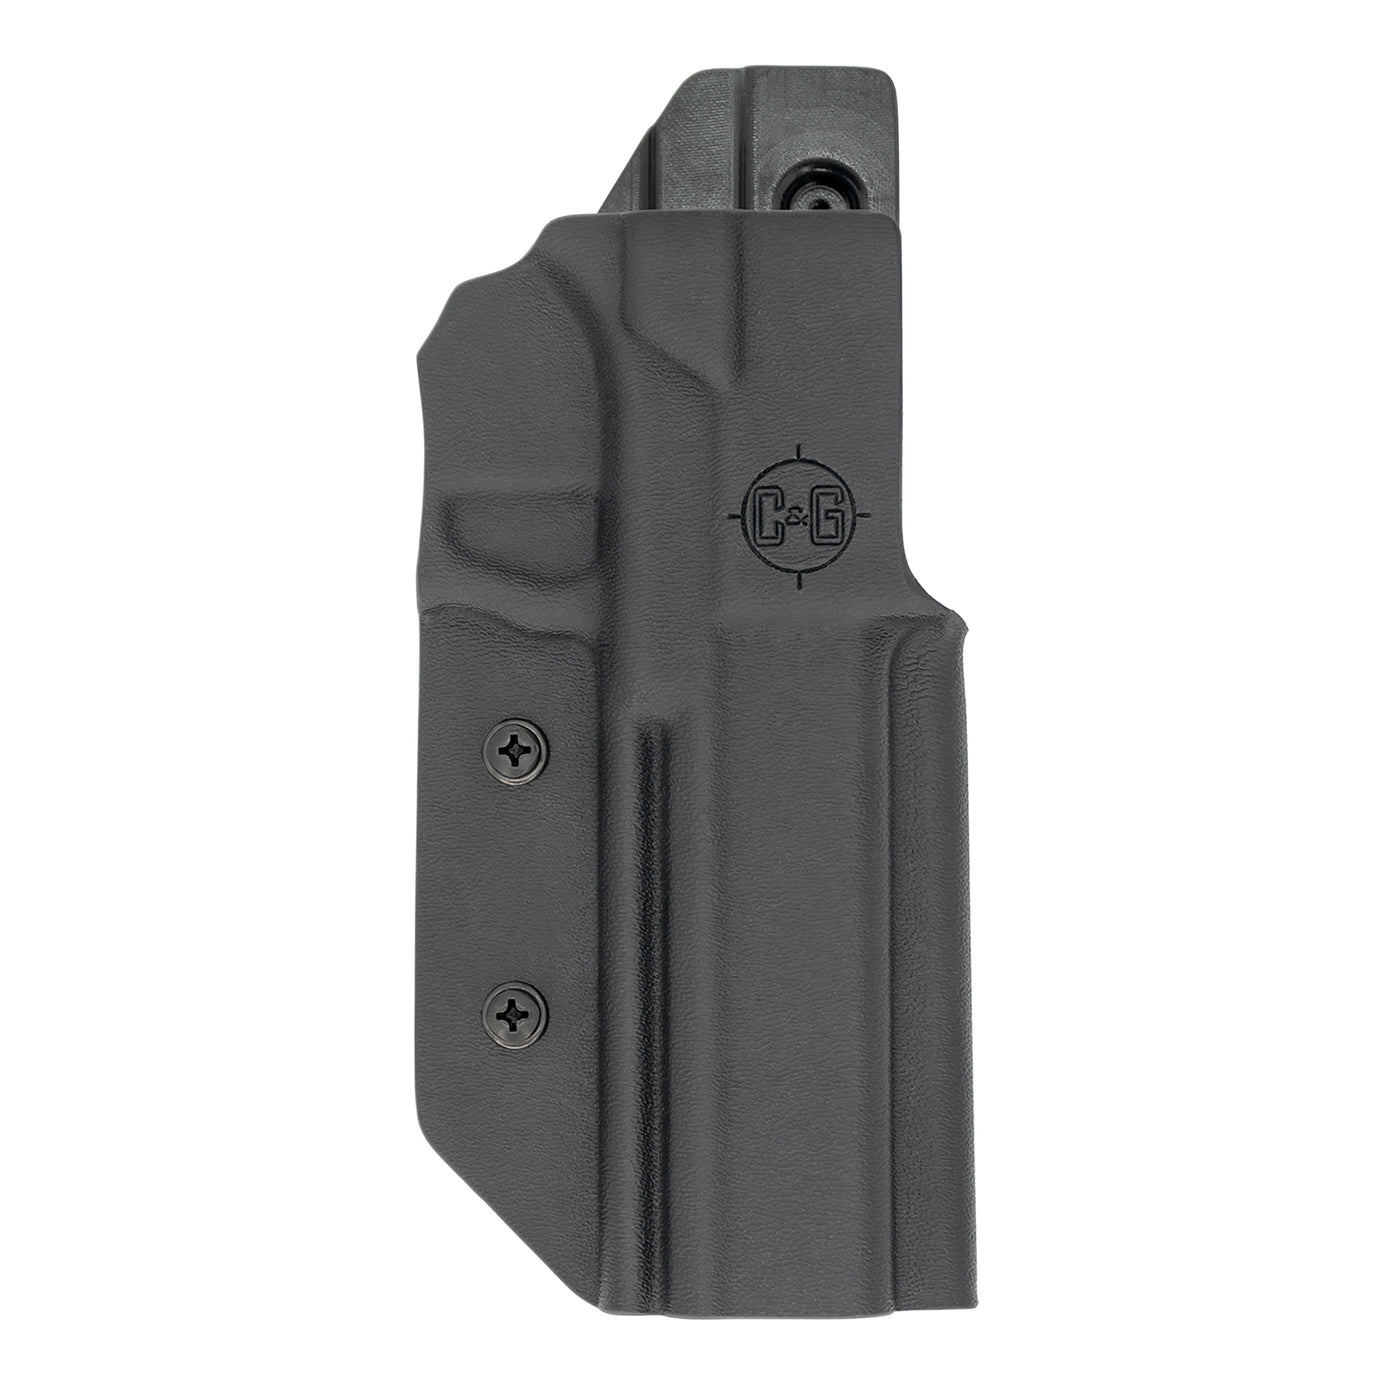 This is the C&G Holsters USPSA and IDPA holster for the Polymer80 PF940V2.